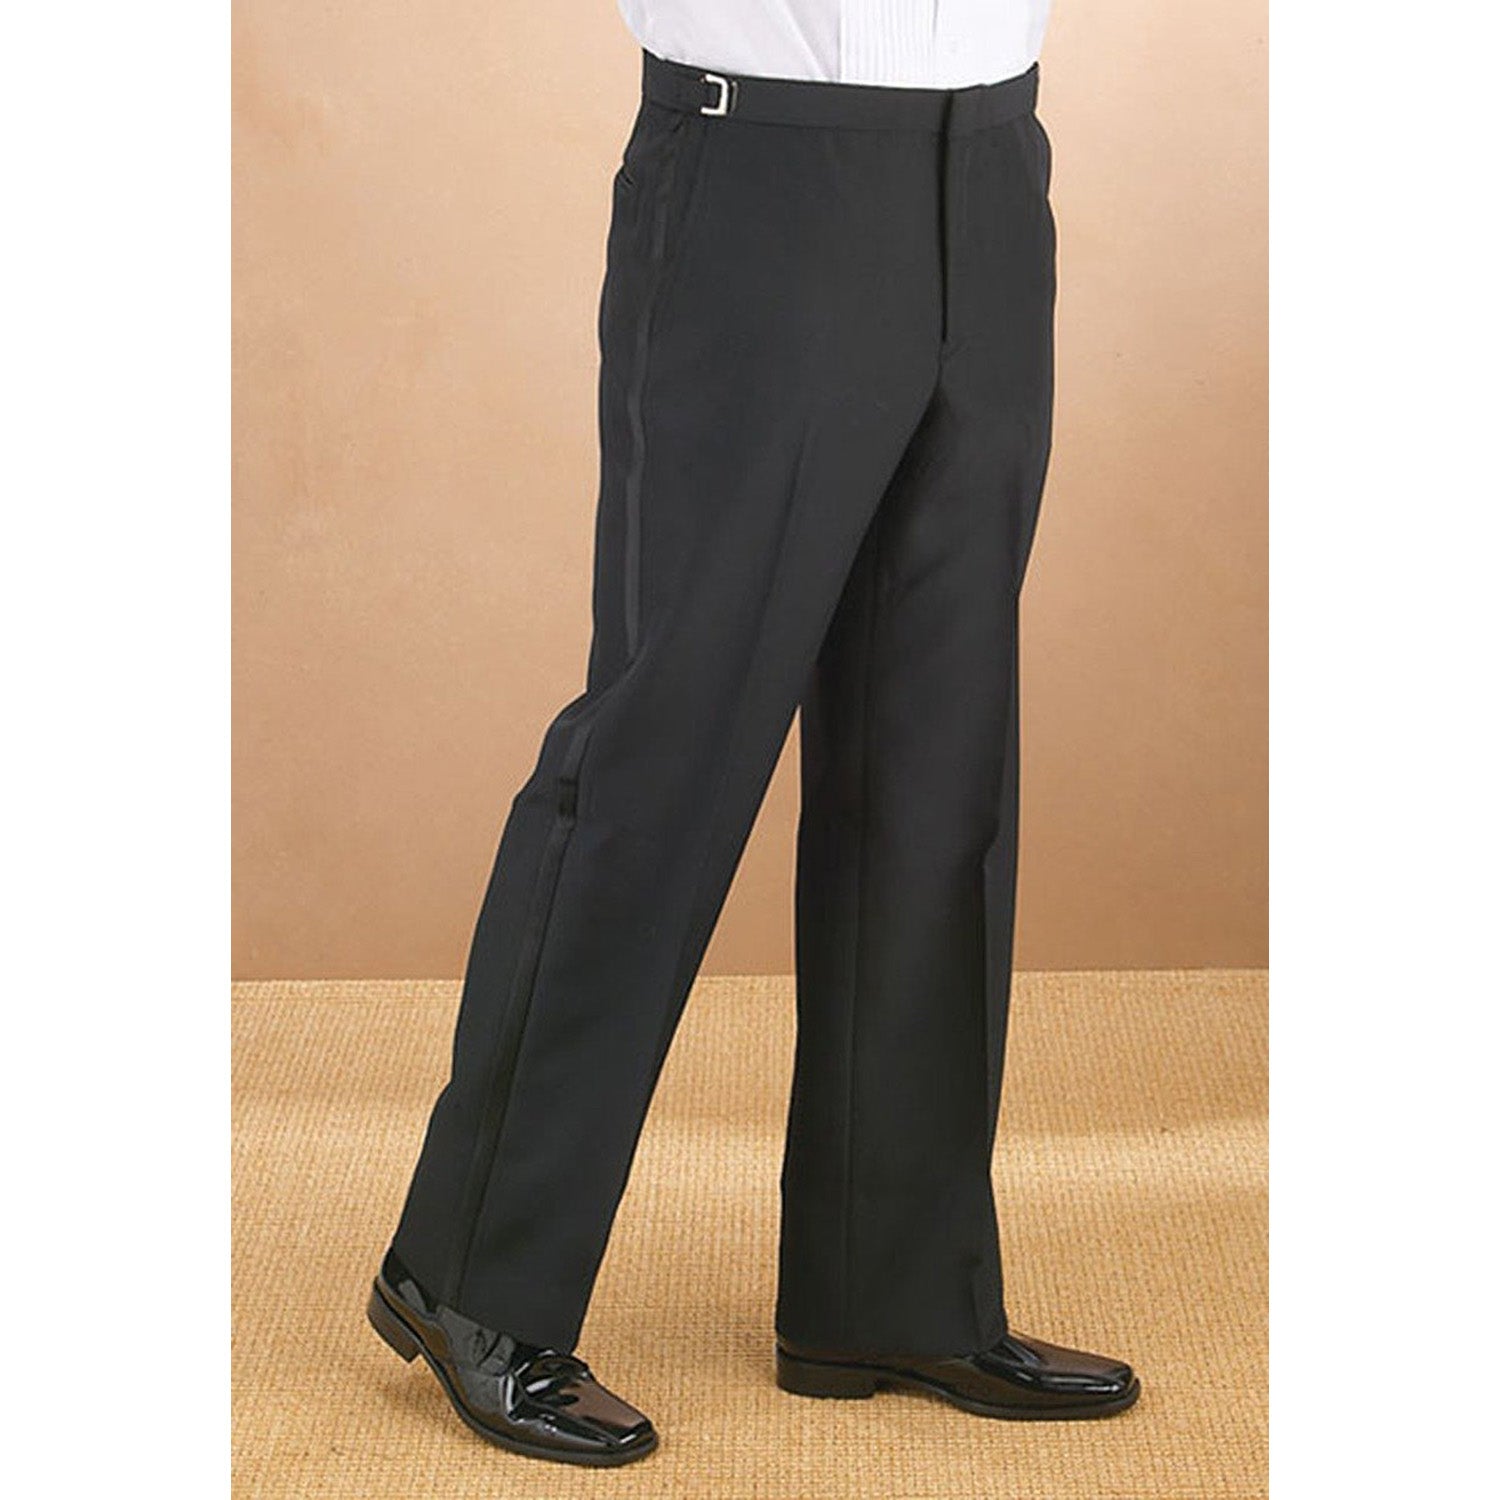 Sir Gregory Men's Fitted Flat Front Tuxedo Pants Formal Satin Stripe  Trousers with Adjustable Waistband Size 27-29 Waist 28 Length Black at  Amazon Men's Clothing store